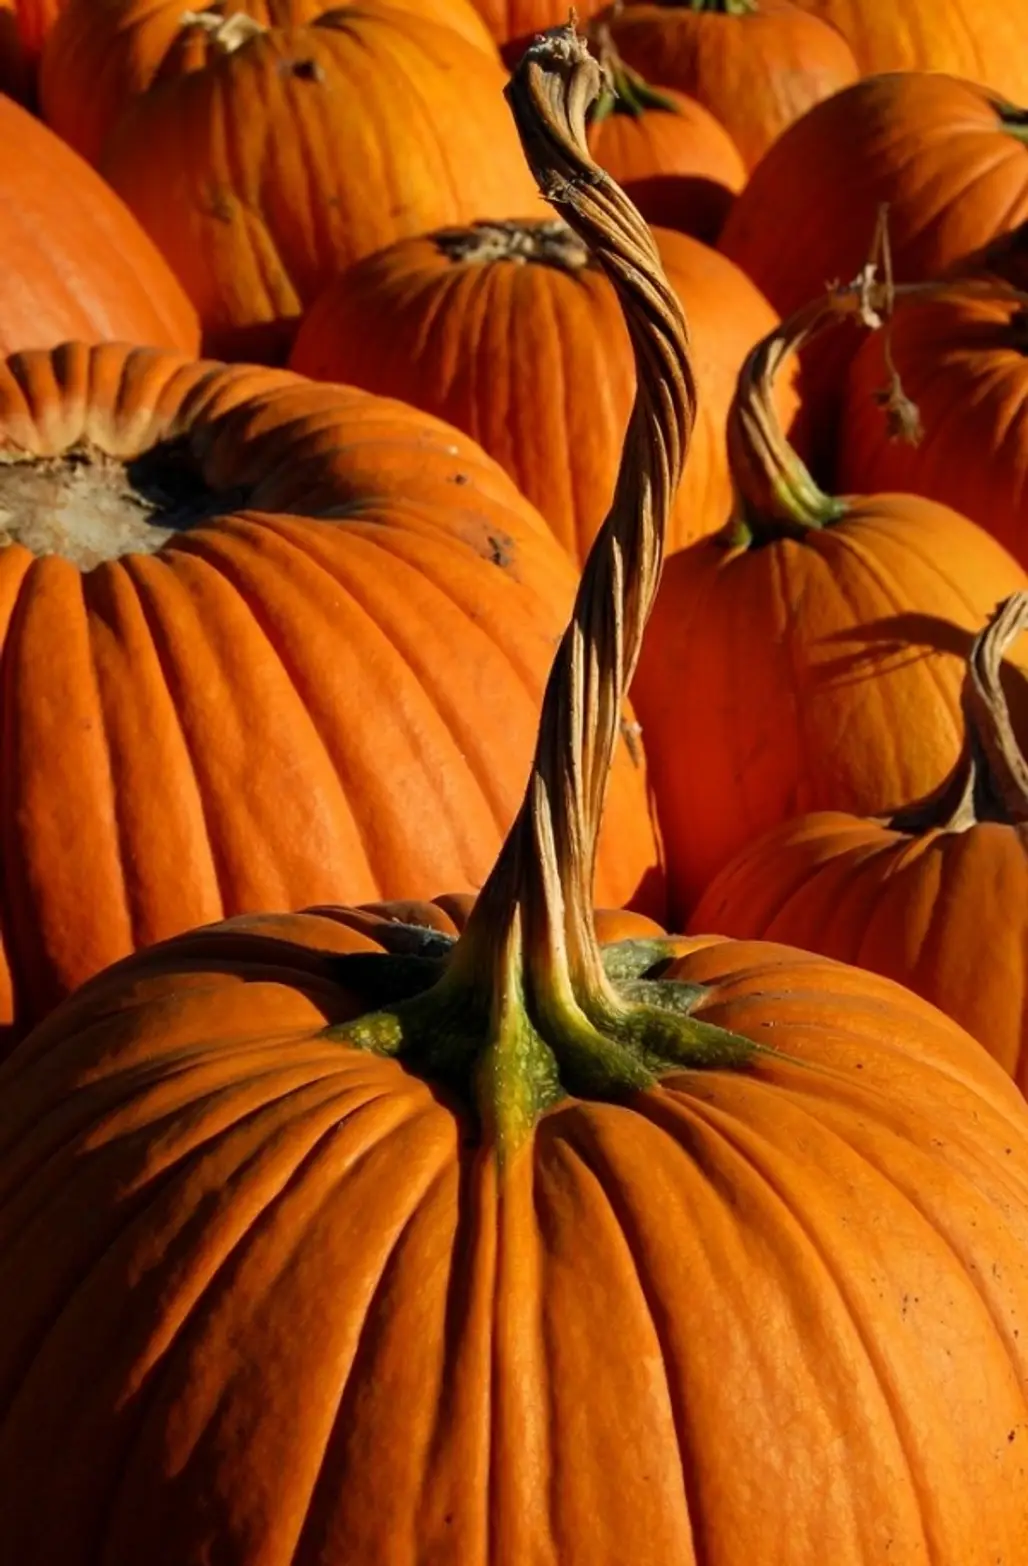 Pumpkin Picking and Carving